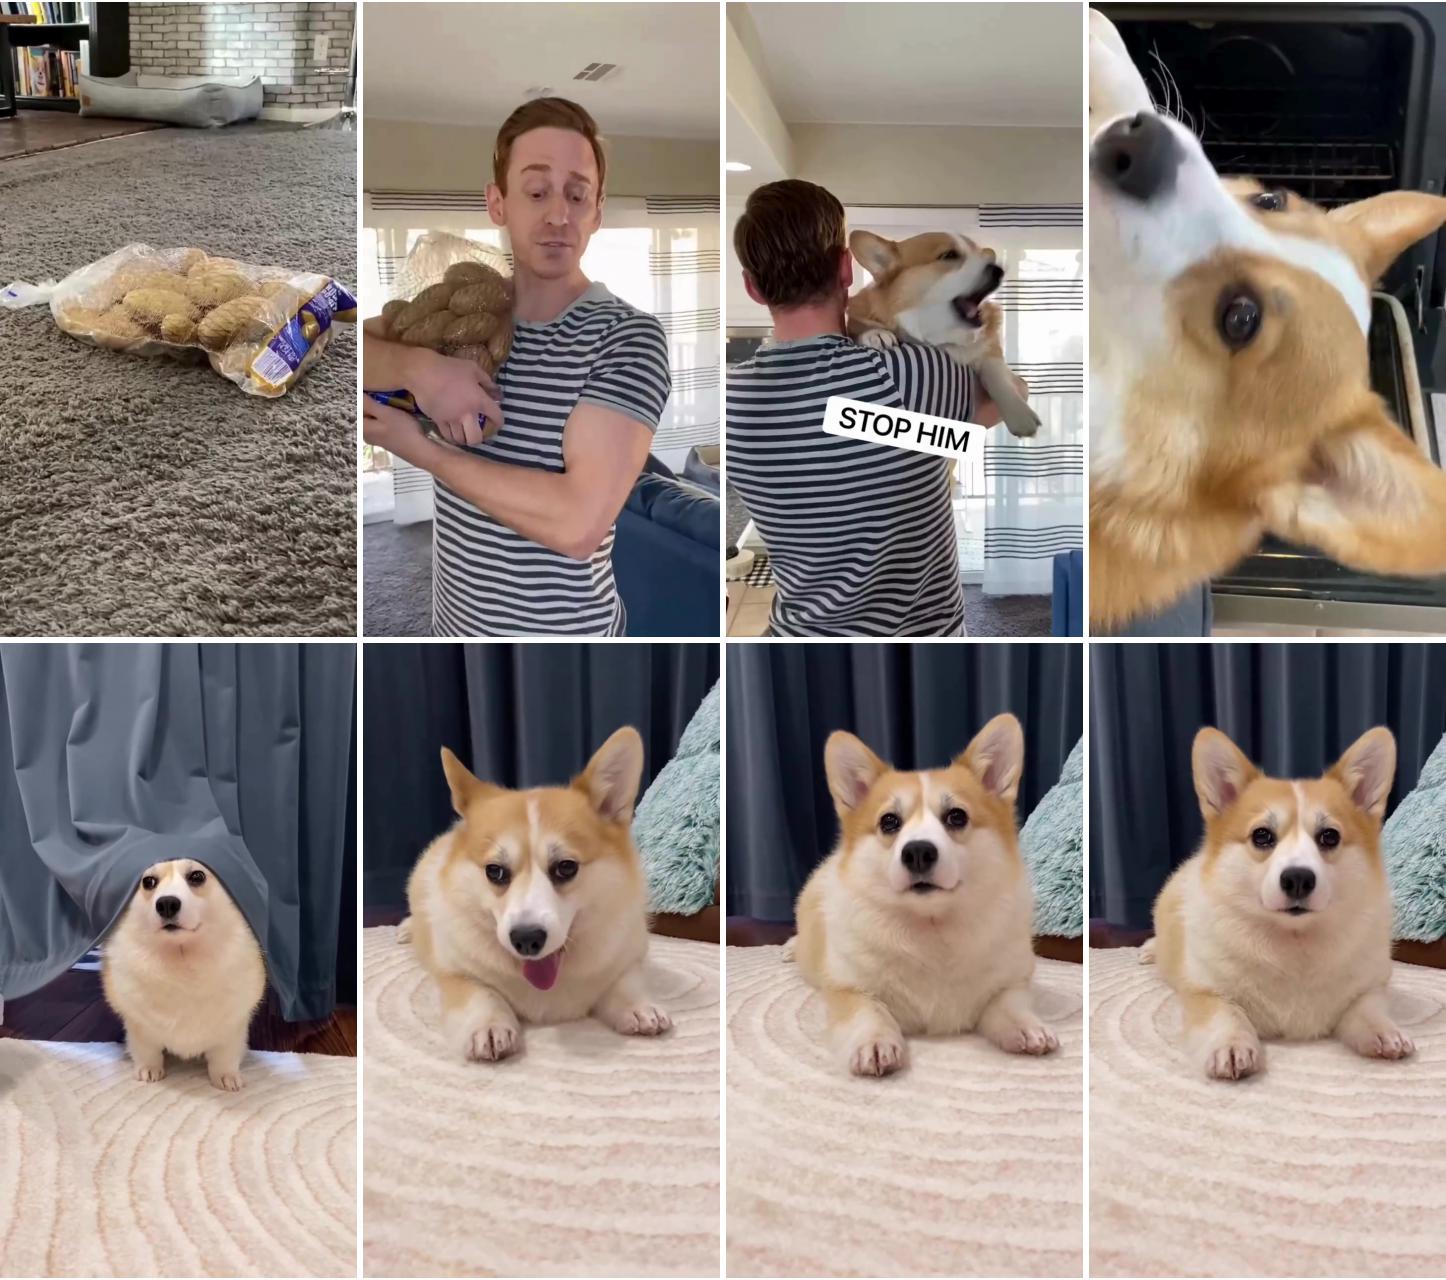 Paw-some picasso: painting your pup's world with artistic accessories; adorable corgi puppy's heartwarming playtime: cute moments under the curtain with mom 